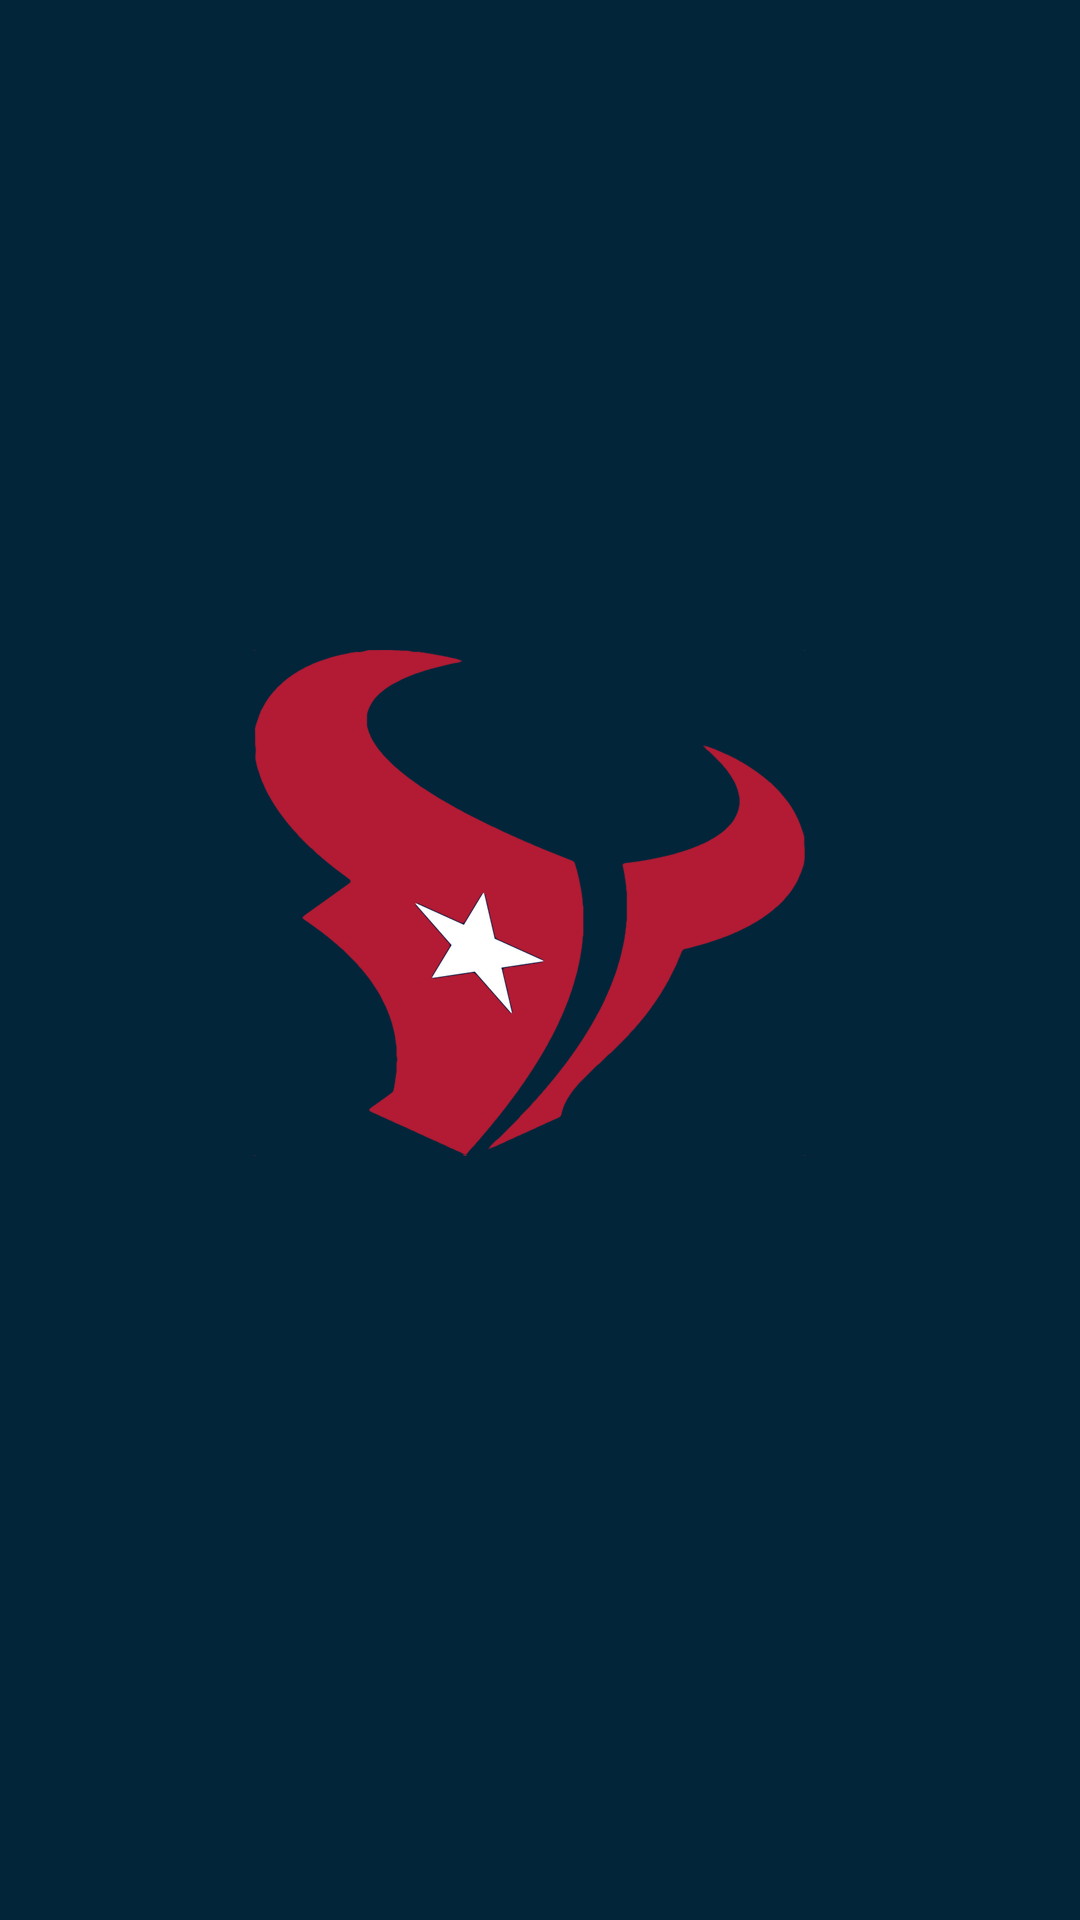 Screensaver iPhone Houston Texans With high-resolution 1080X1920 pixel. Donwload and set as wallpaper for your iPhone X, iPhone XS home screen backgrounds, XS Max, XR, iPhone8 lock screen wallpaper, iPhone 7, 6, SE, and other mobile devices